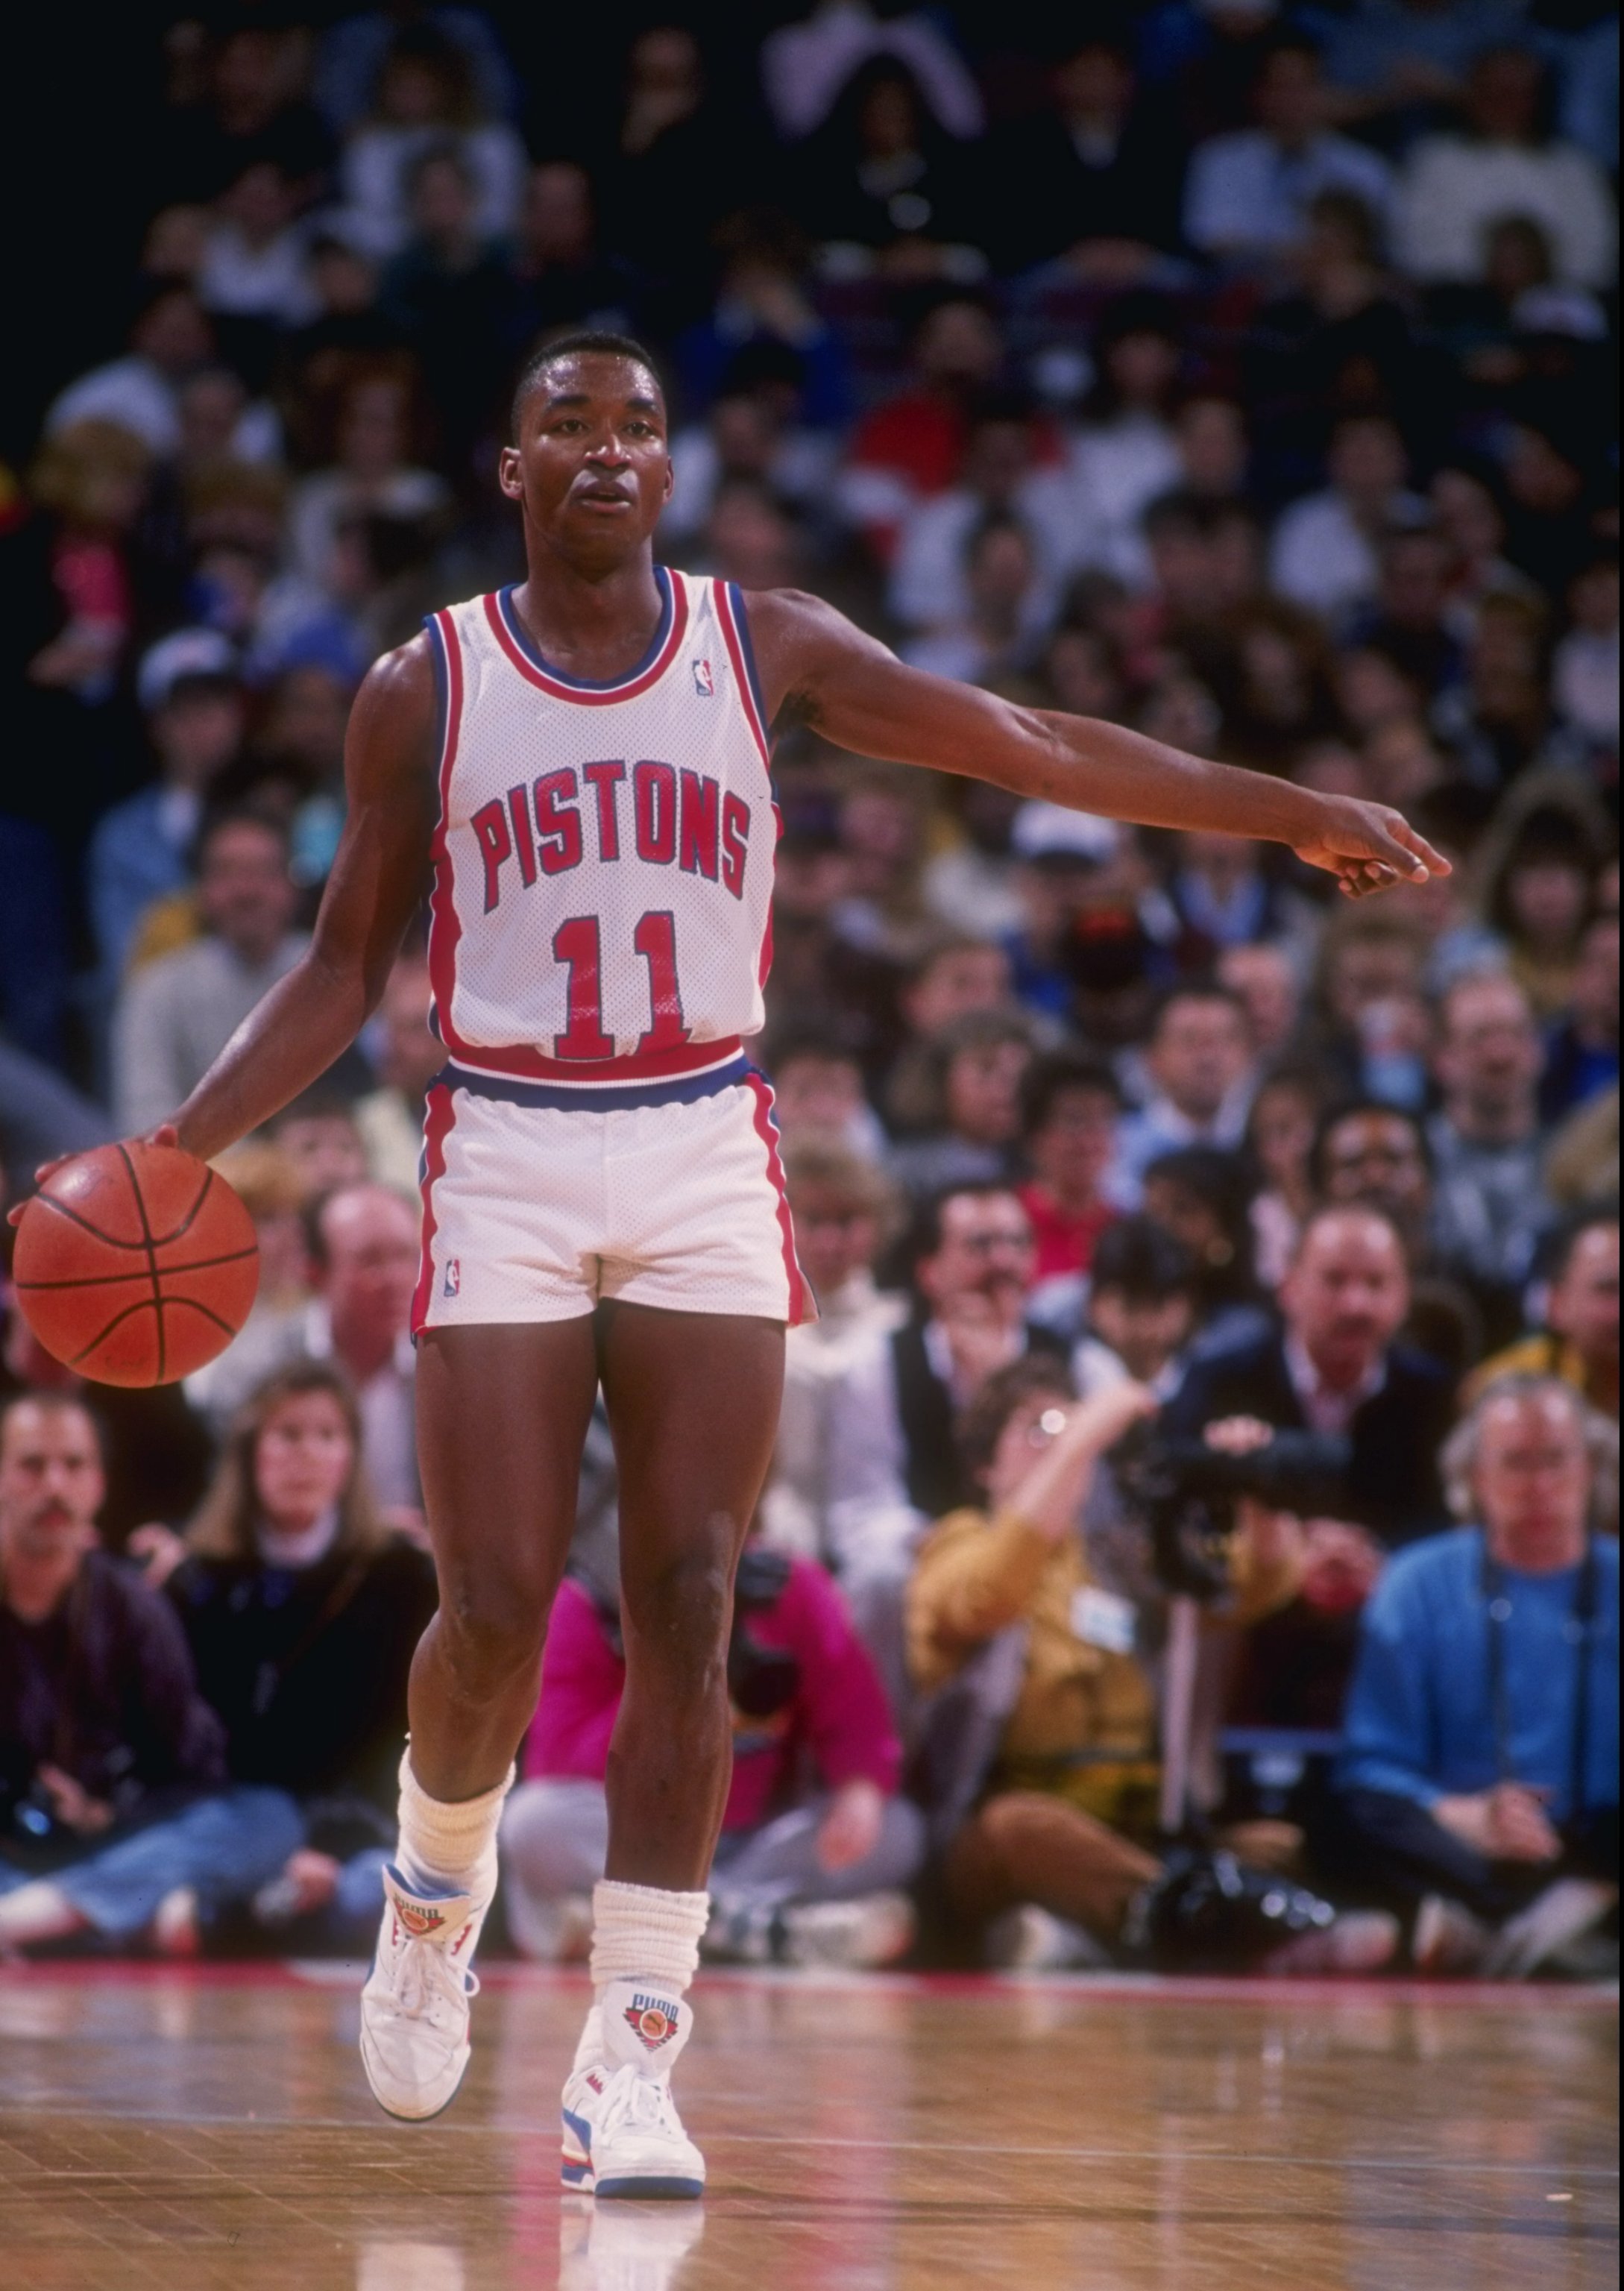 Can The NBA Bring Back The Tiny Shorts? PLEASE?!